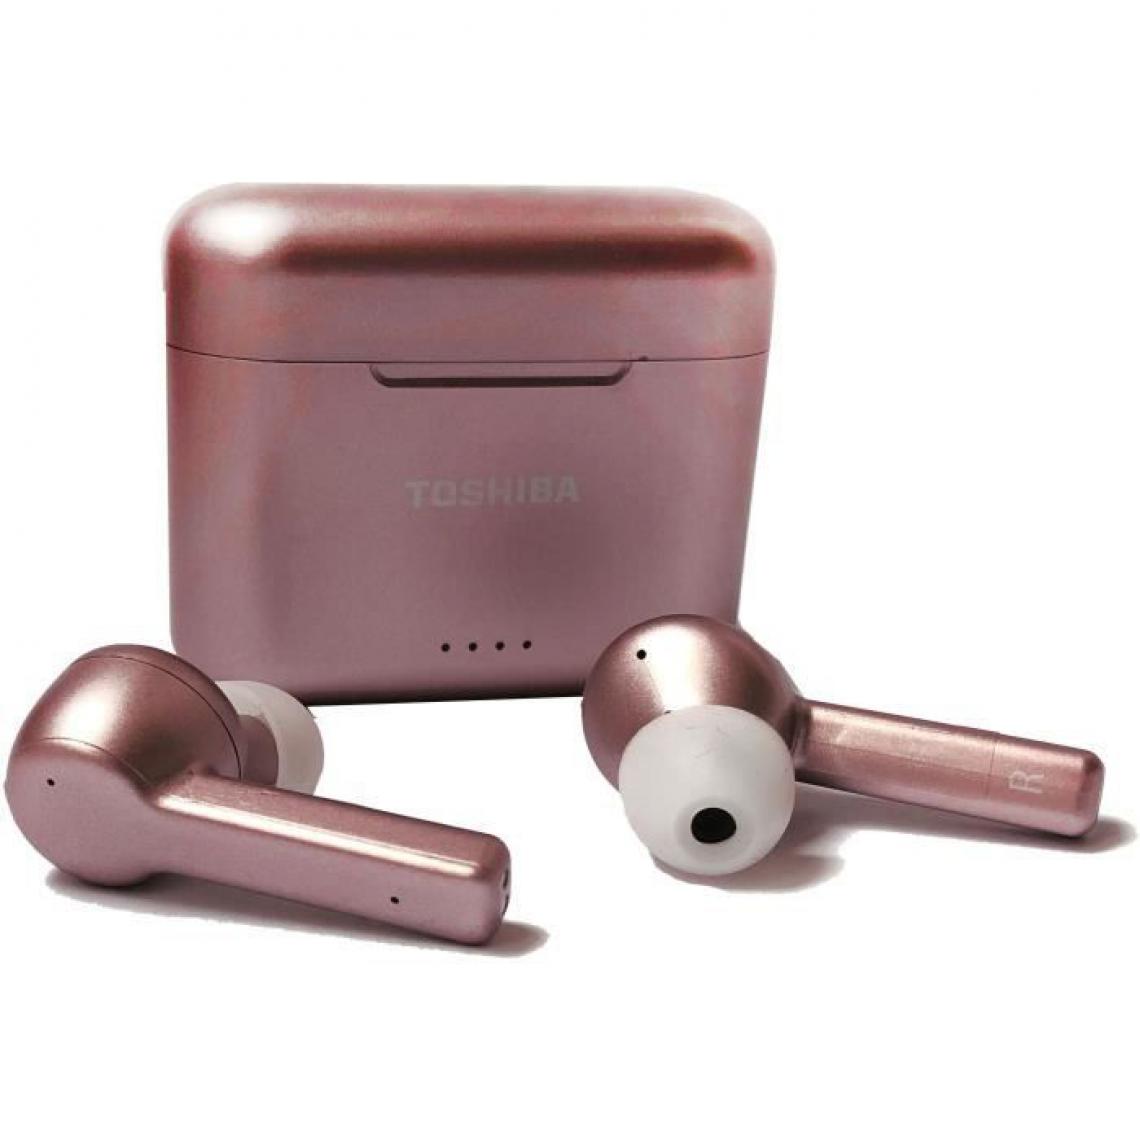 Toshiba - TOSHIBA RZE-BT750EPN- Ecouteurs True Wireless intra auriculaire Bluetooth - Auto-pairing - Boitier de charge (Qi) - Rose gold - Casque